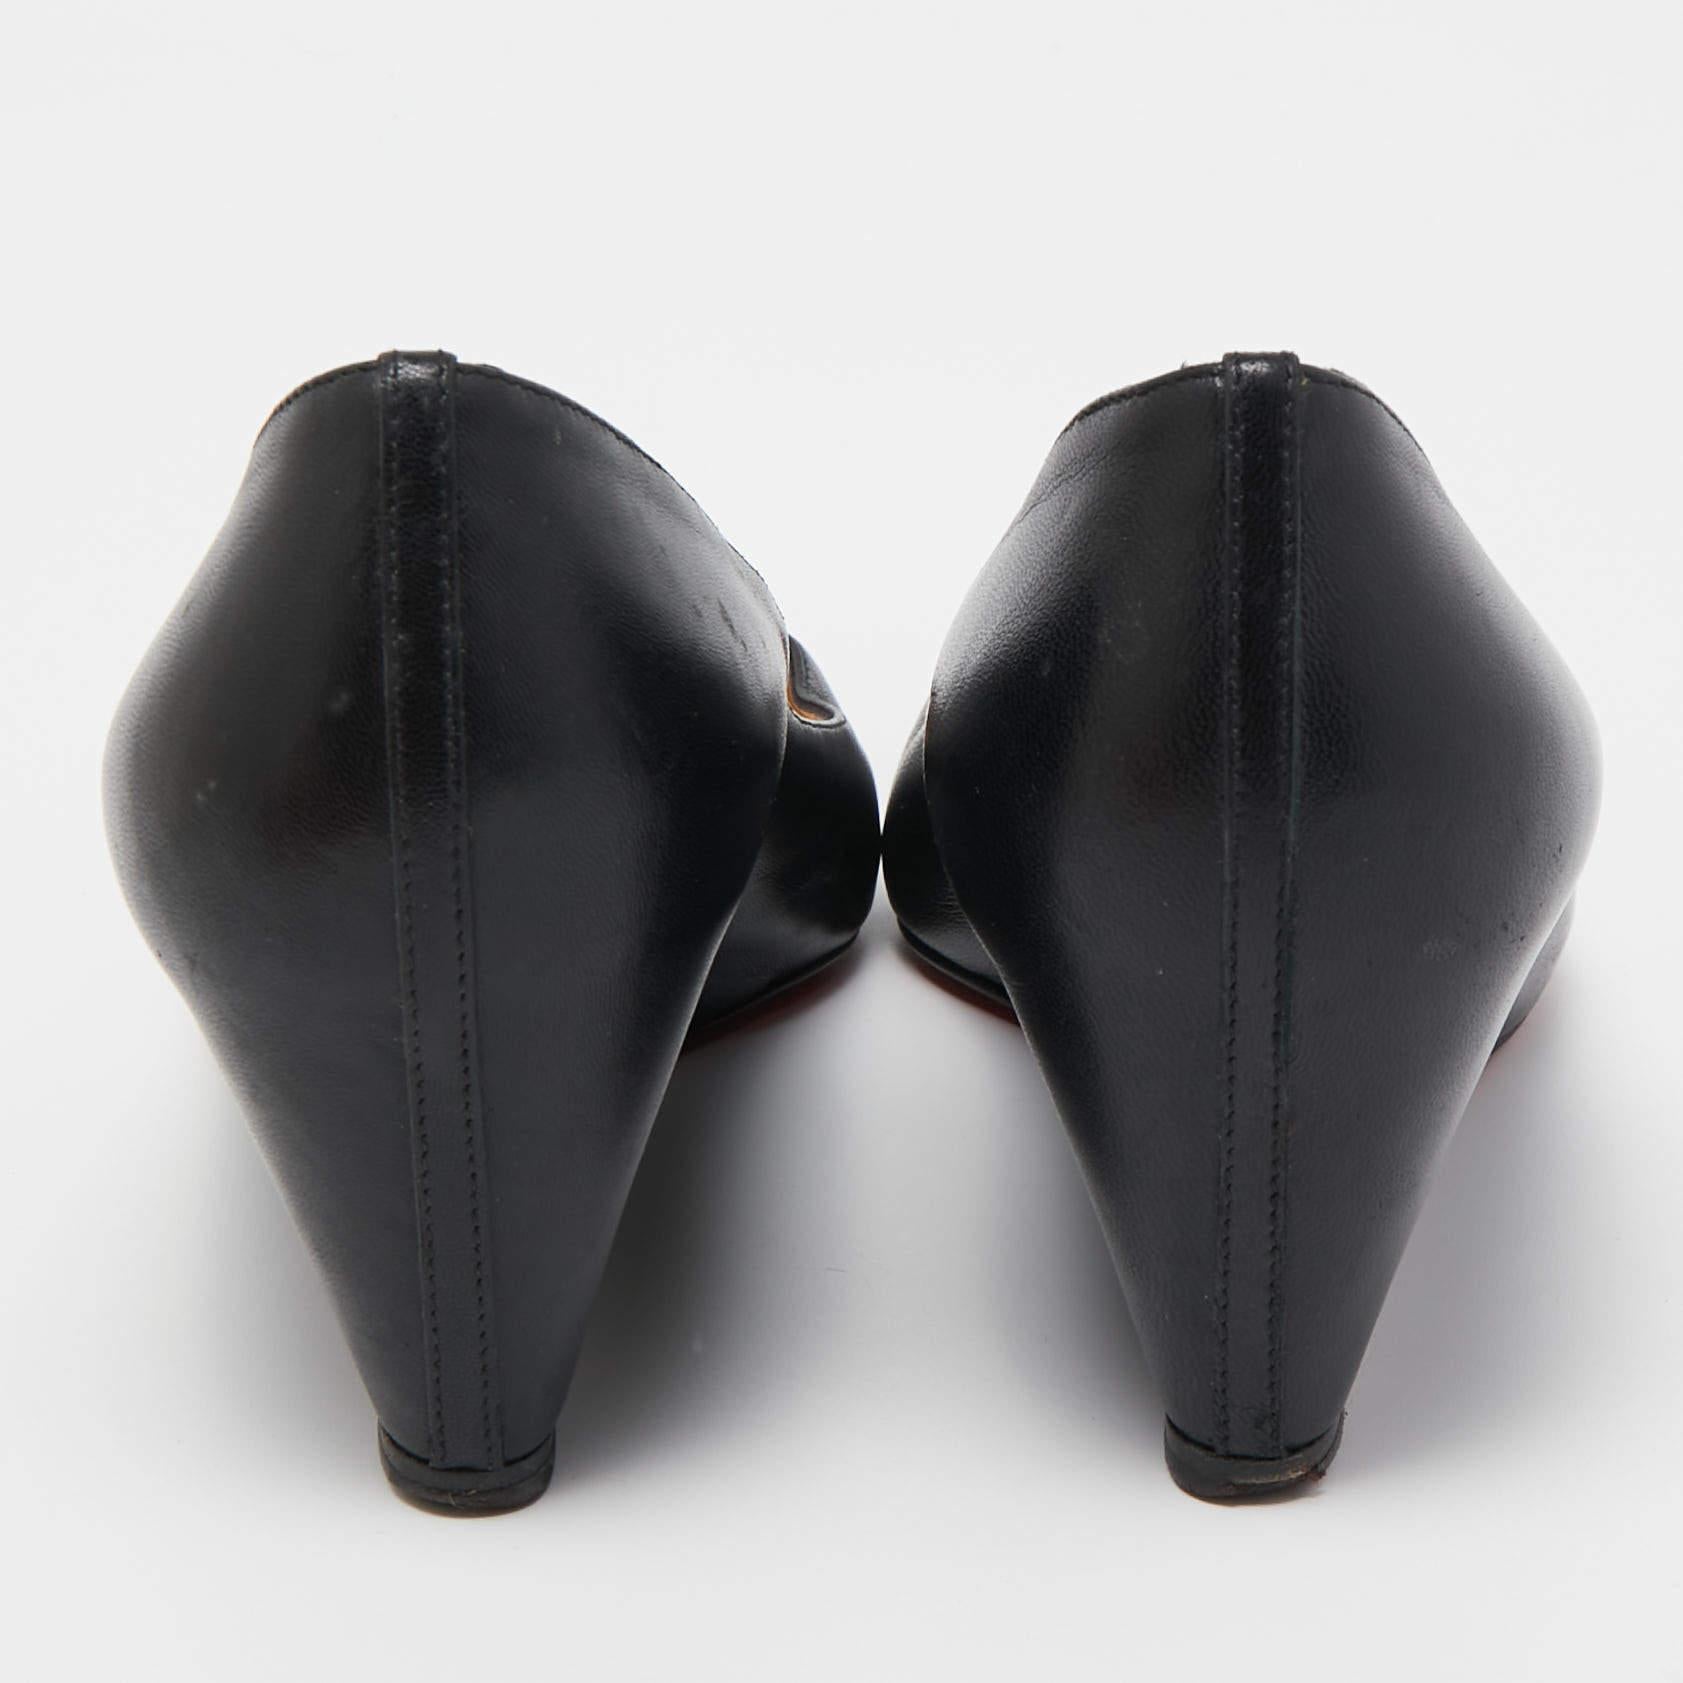 Christian Louboutin Black Leather Pointed Toe Wedge Pumps Size 37.5 For Sale 3